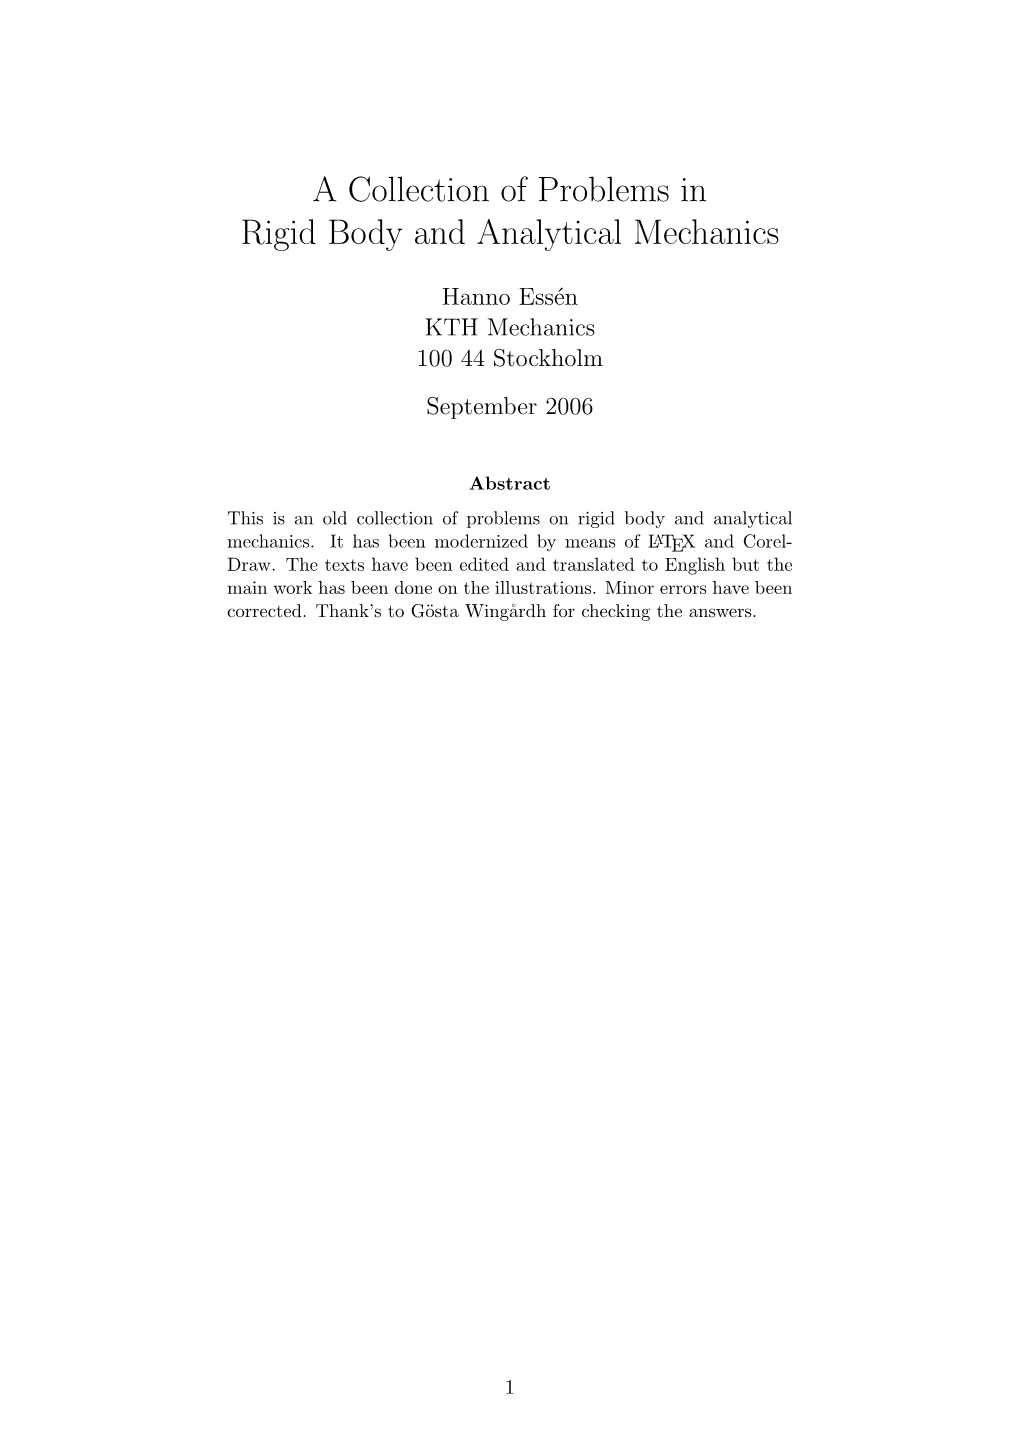 A Collection of Problems in Rigid Body and Analytical Mechanics